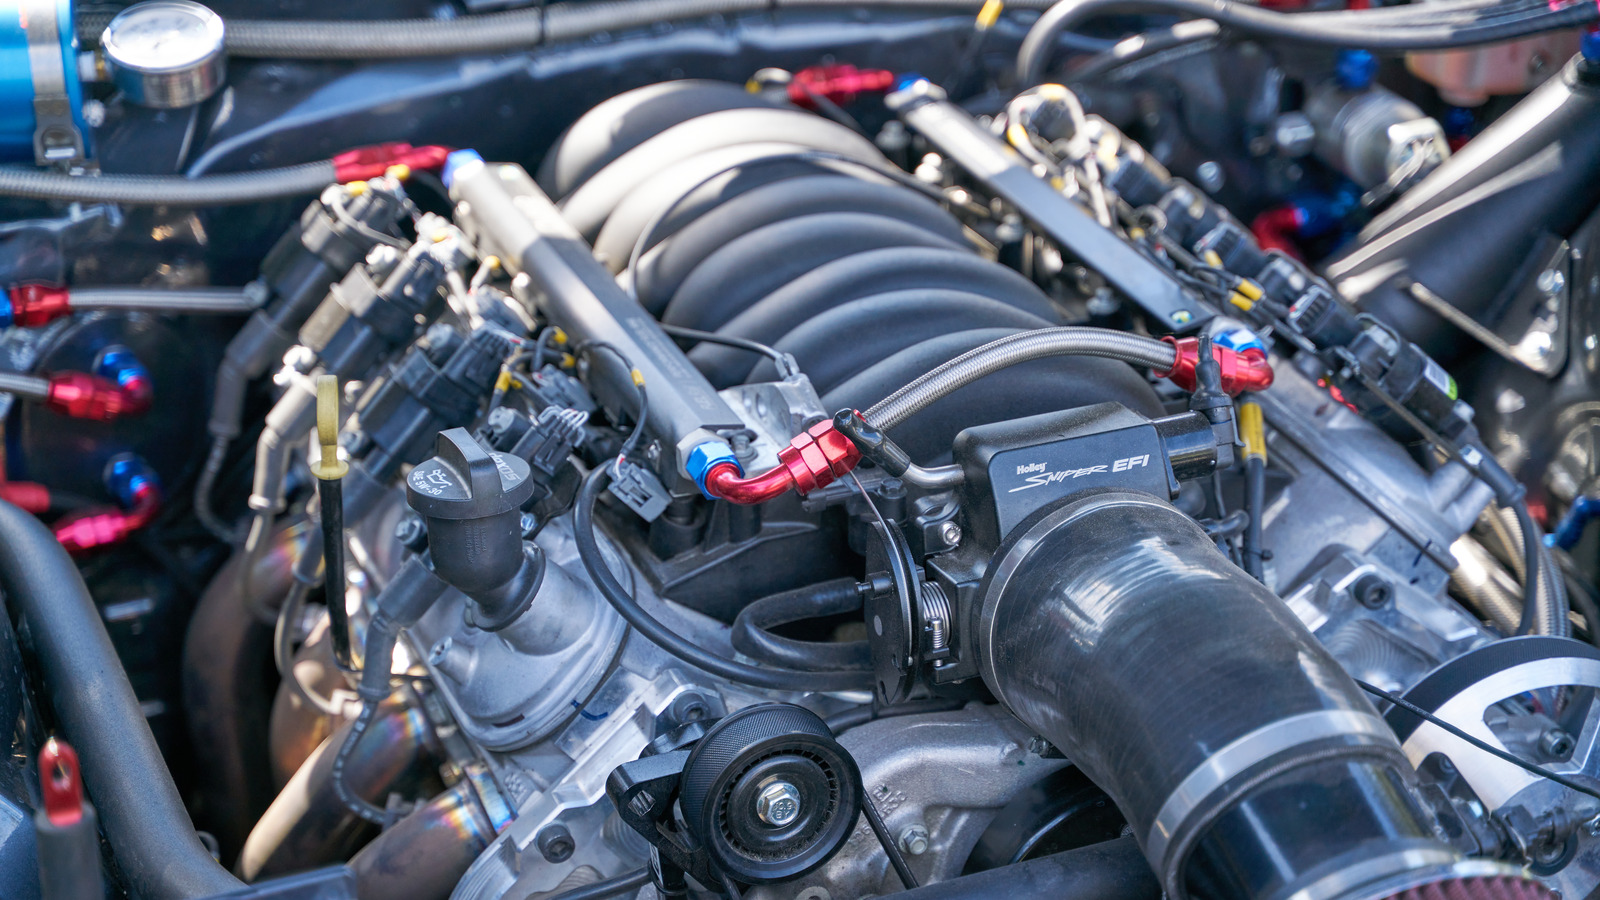 How Much Does A Used Engine Cost? - High Quality Used Auto Parts - Best ...